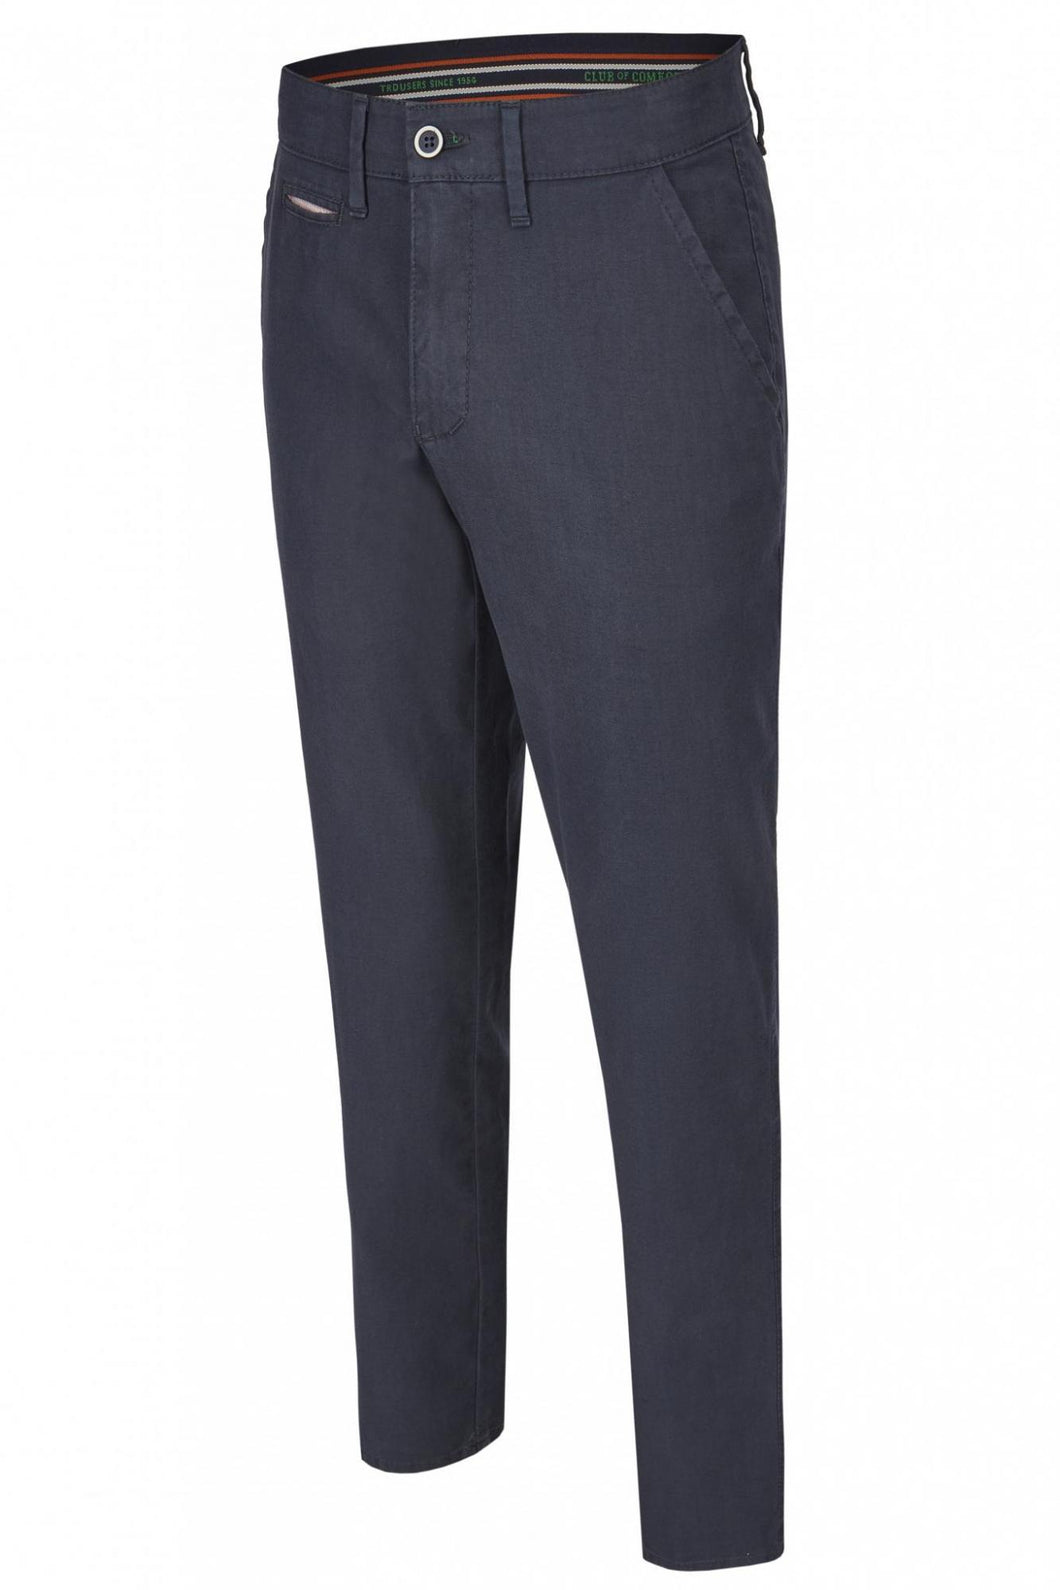 Club of Comfort cotton and linen trousers